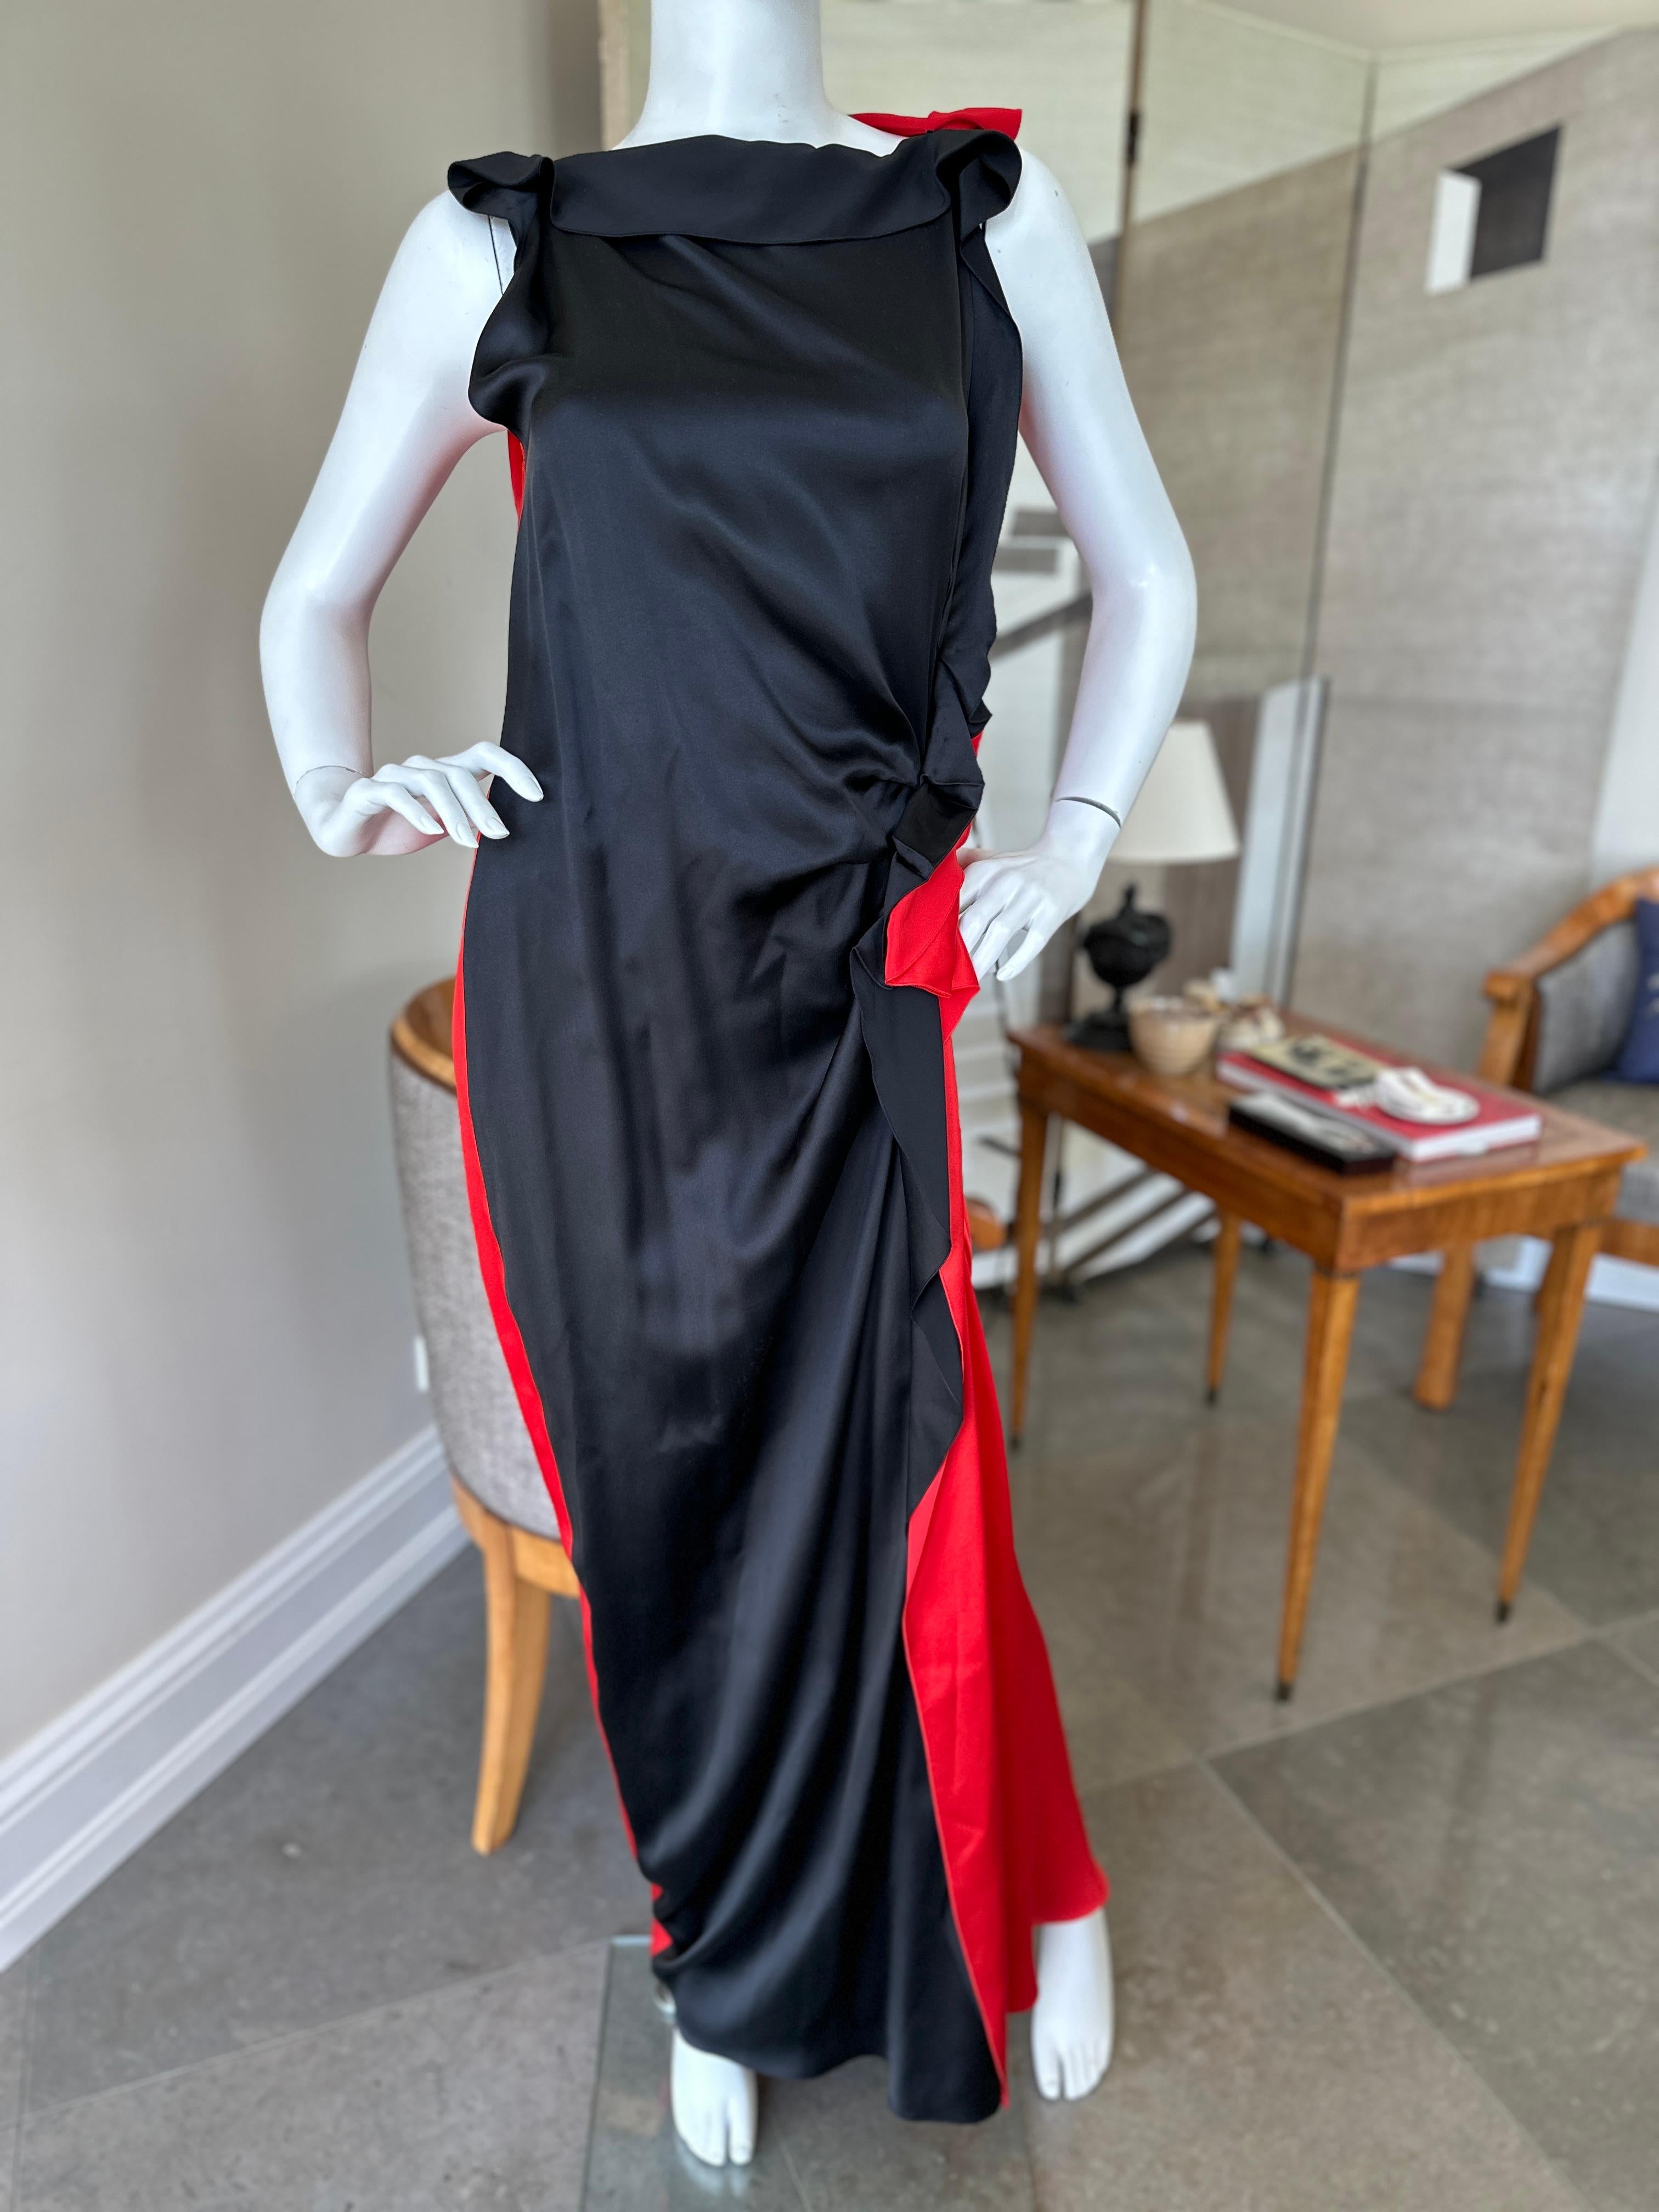 Lanvin by Alber Elbaz Silk Colorblock Evening Dress from Spring 2013 In Excellent Condition For Sale In Cloverdale, CA